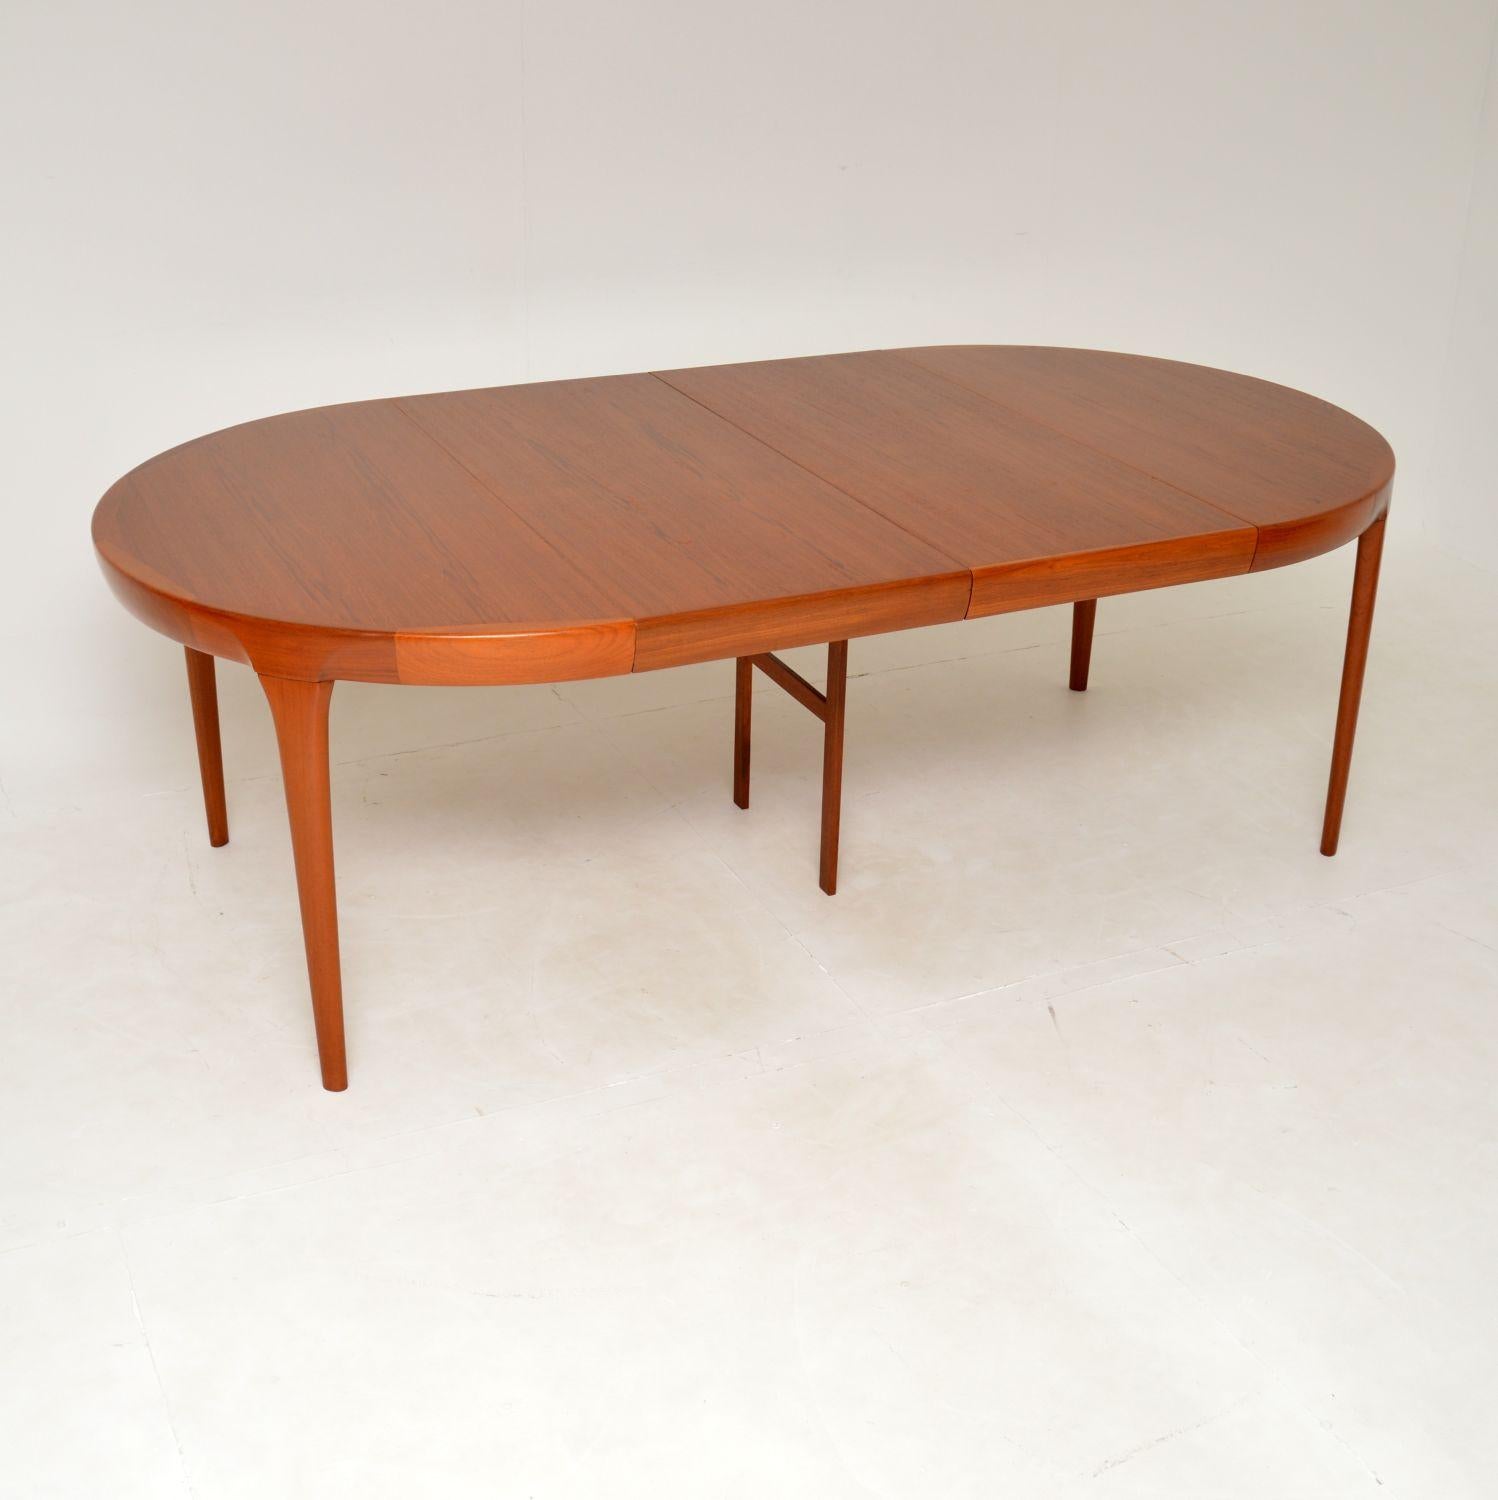 A stunning vintage Danish teak dining table of the highest quality. This was designed by IB Kofod Larsen, it was made in Denmark and dates from the 1960’s.

We have had this stripped and re-polished to a very high standard, the condition is